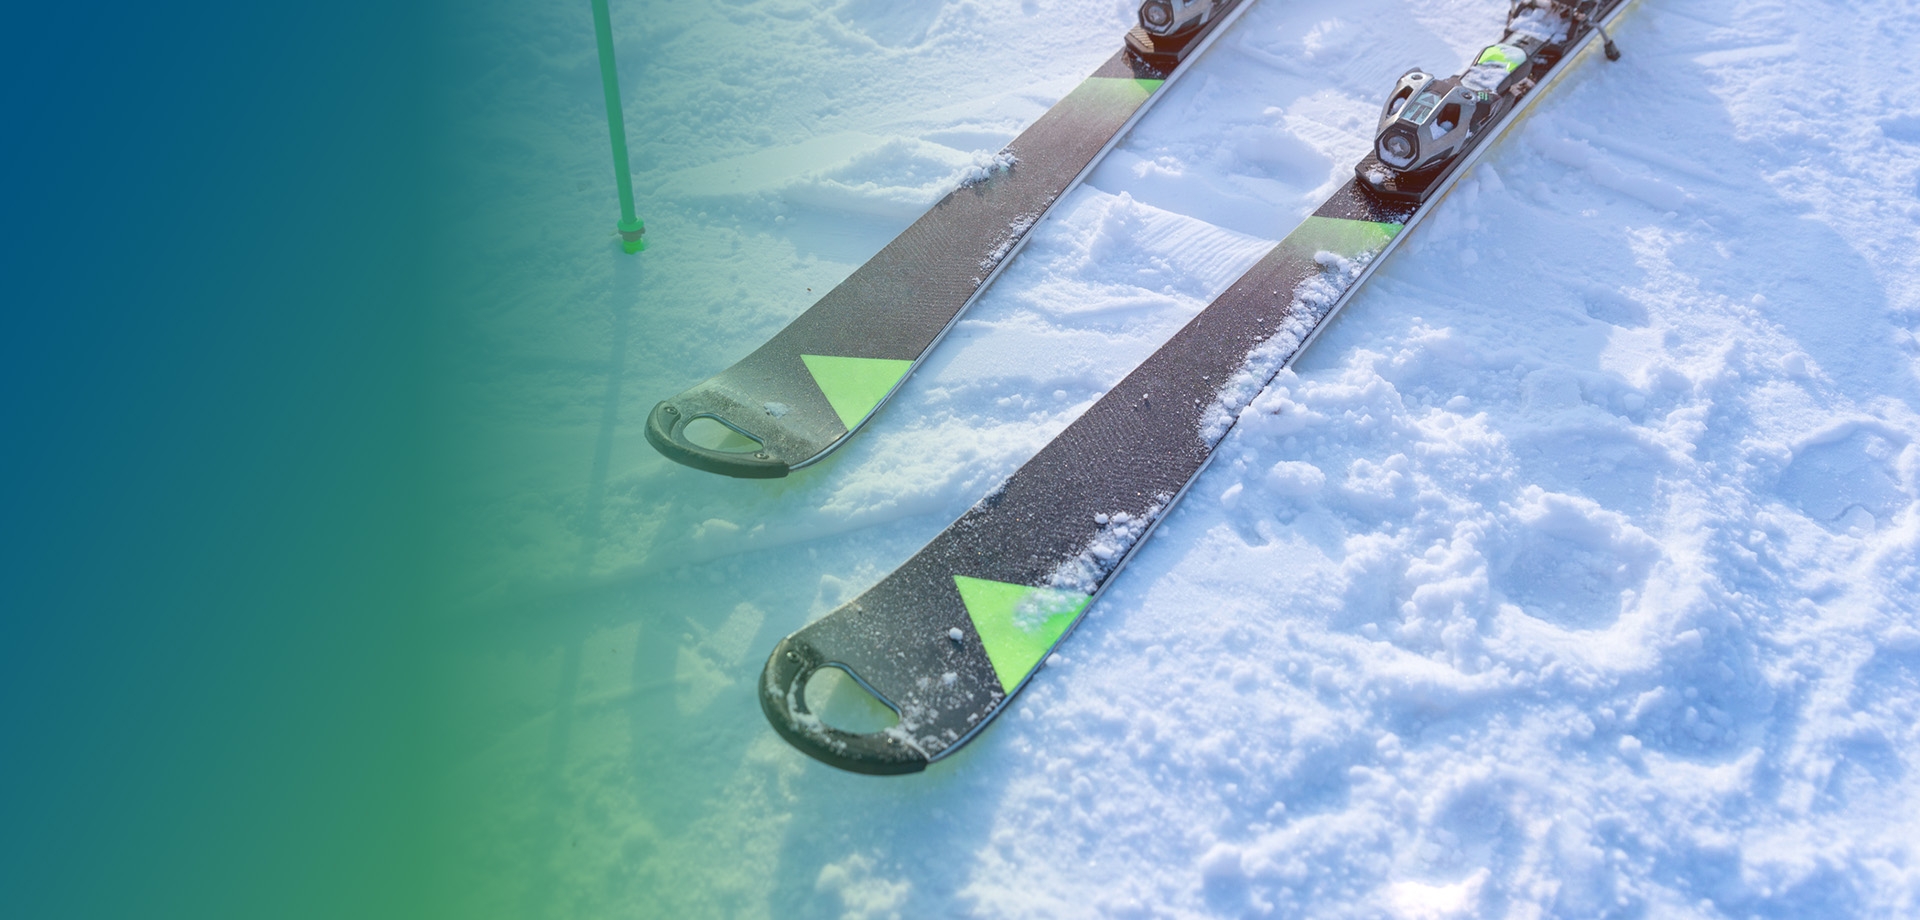 Skis in the Snow